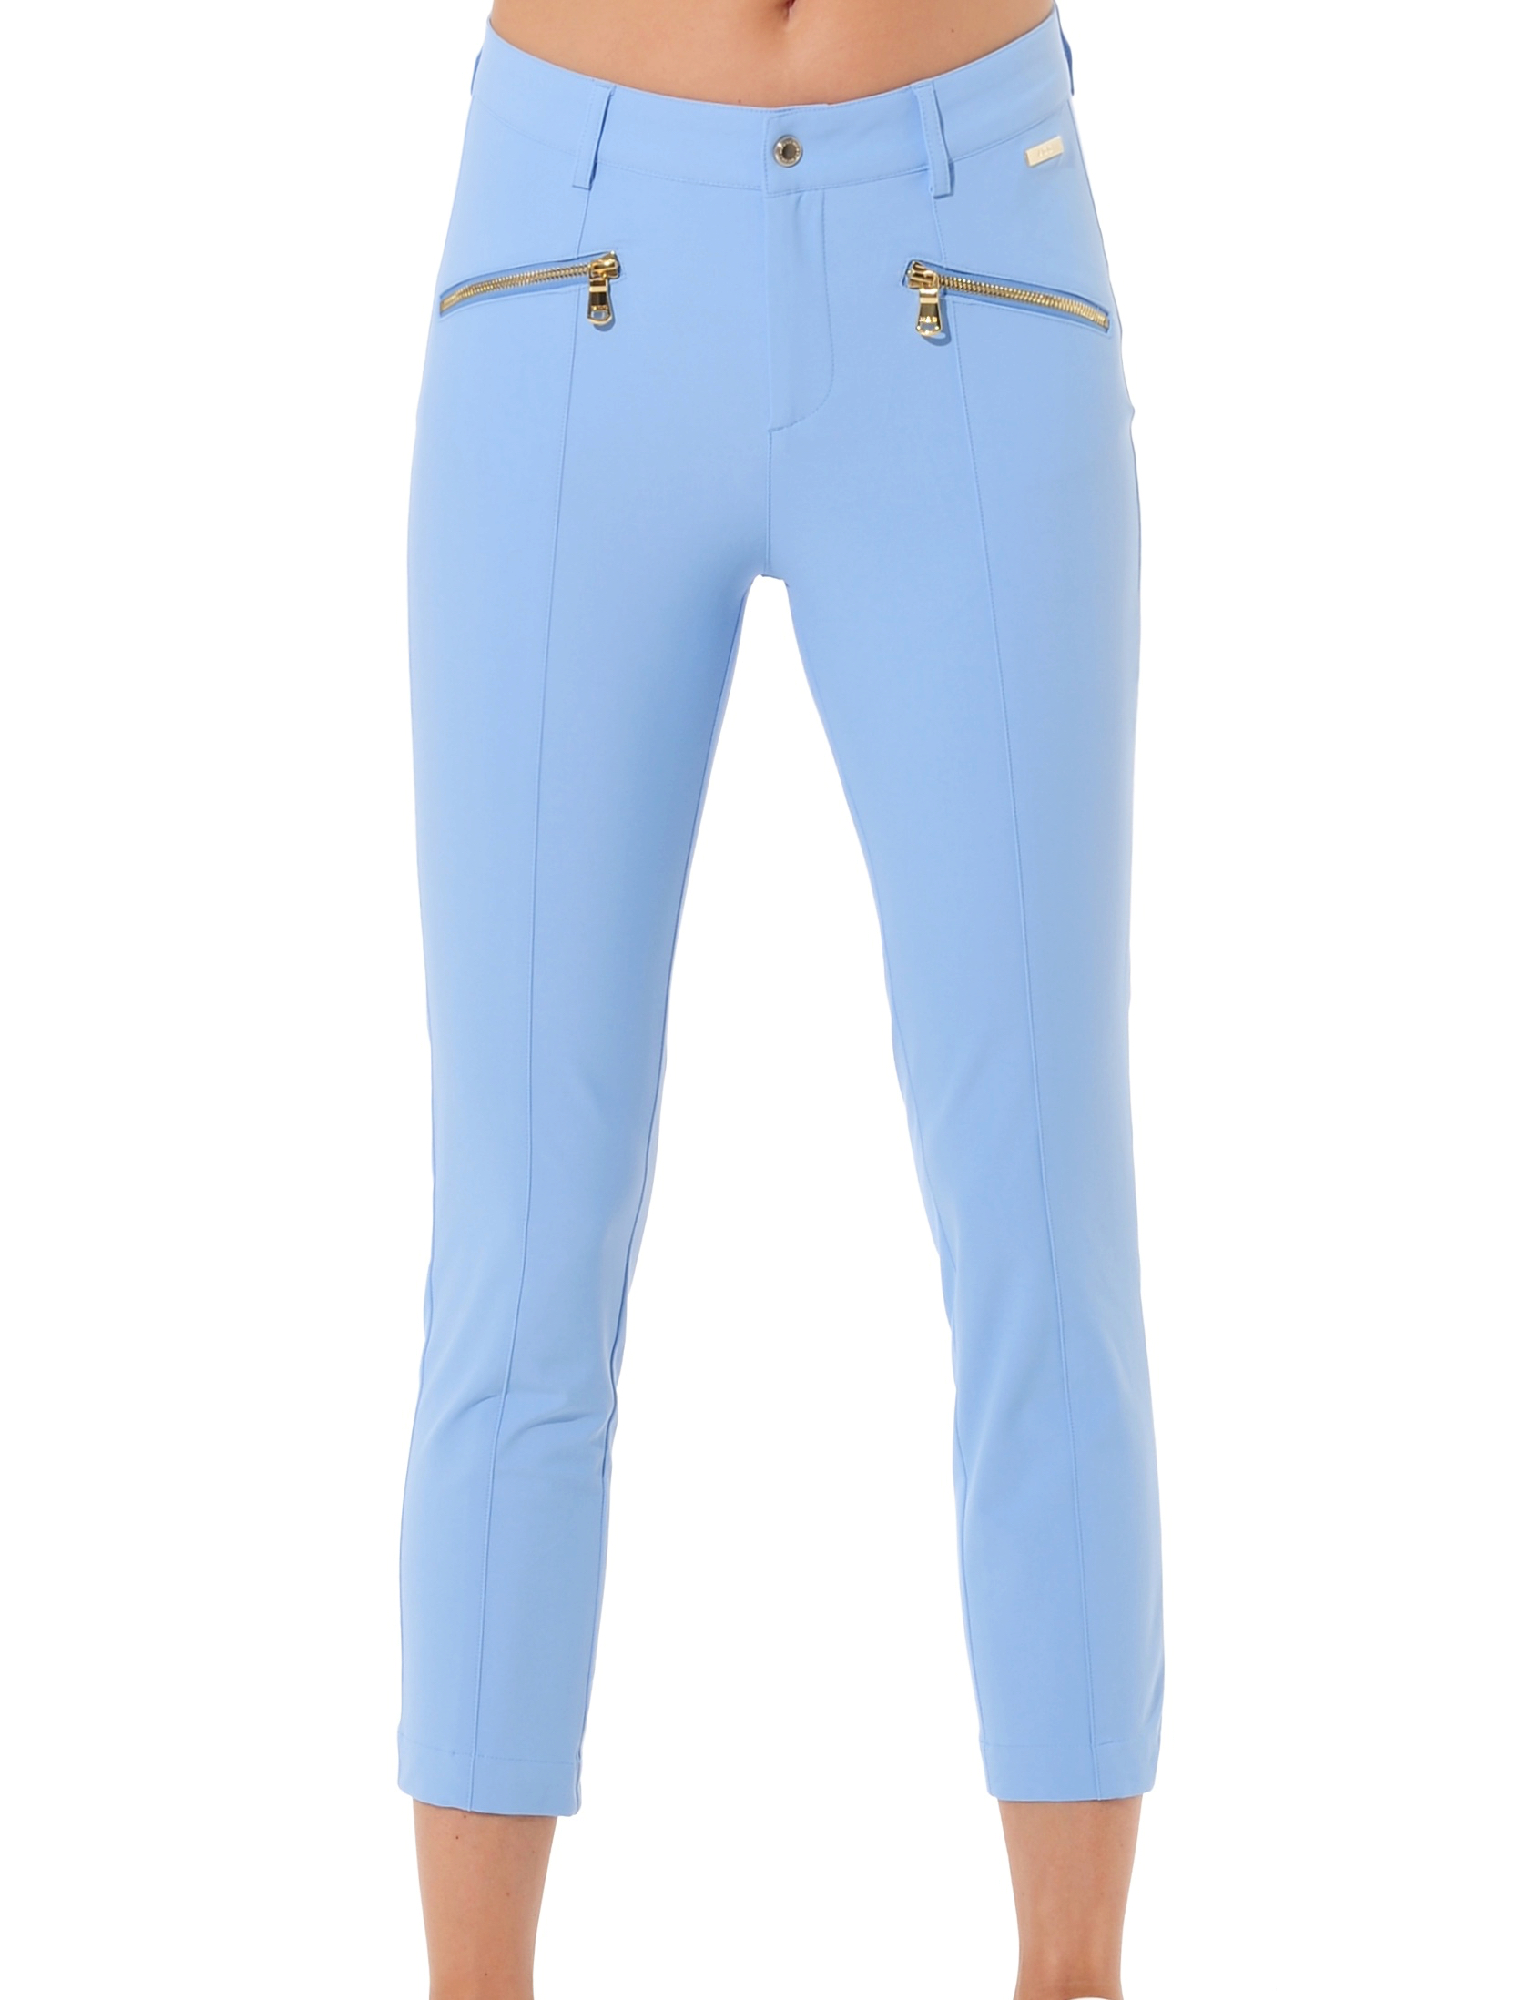 4way stretch shiny gold zip curvy cropped pants baby blue 